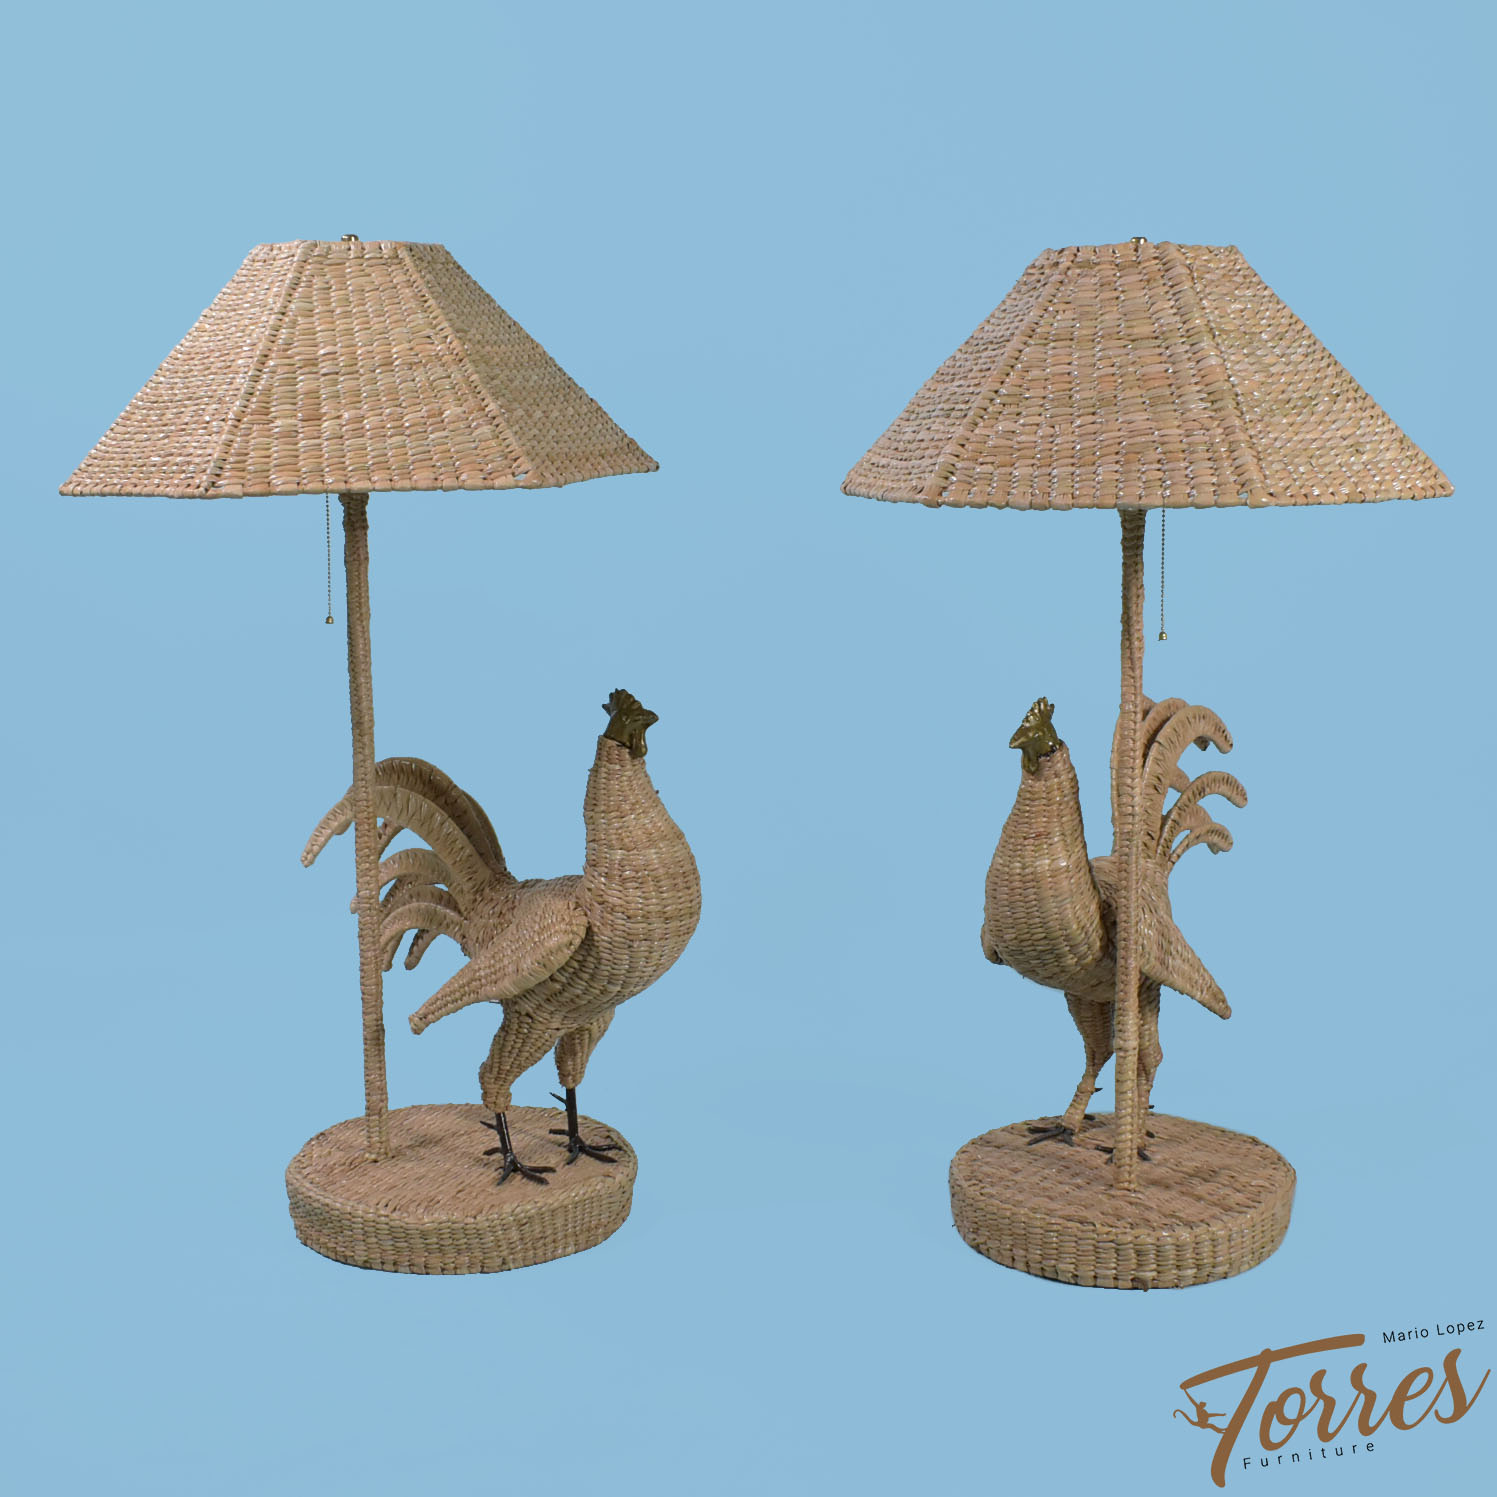 Of Rooster Table Lamps - Mario Lopez Torres